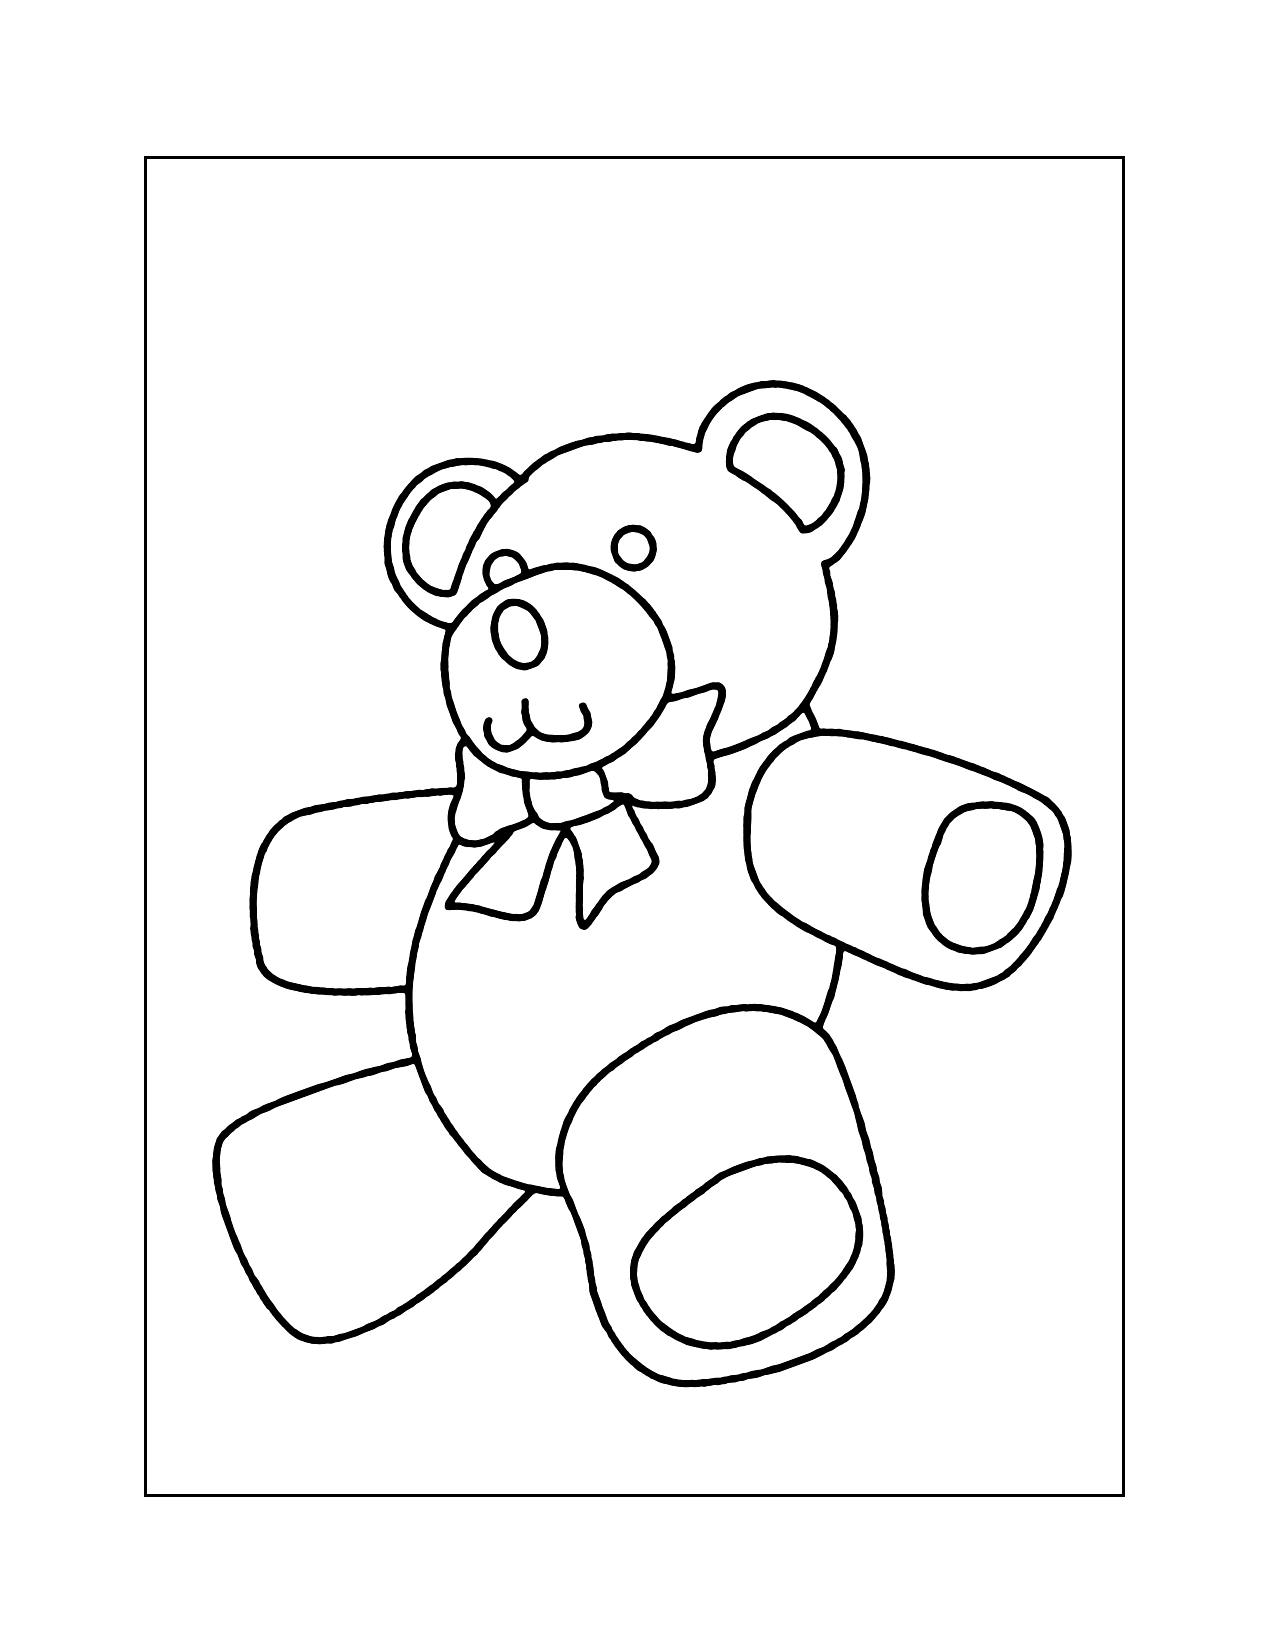 Teddy Bear With Bow Coloring Page